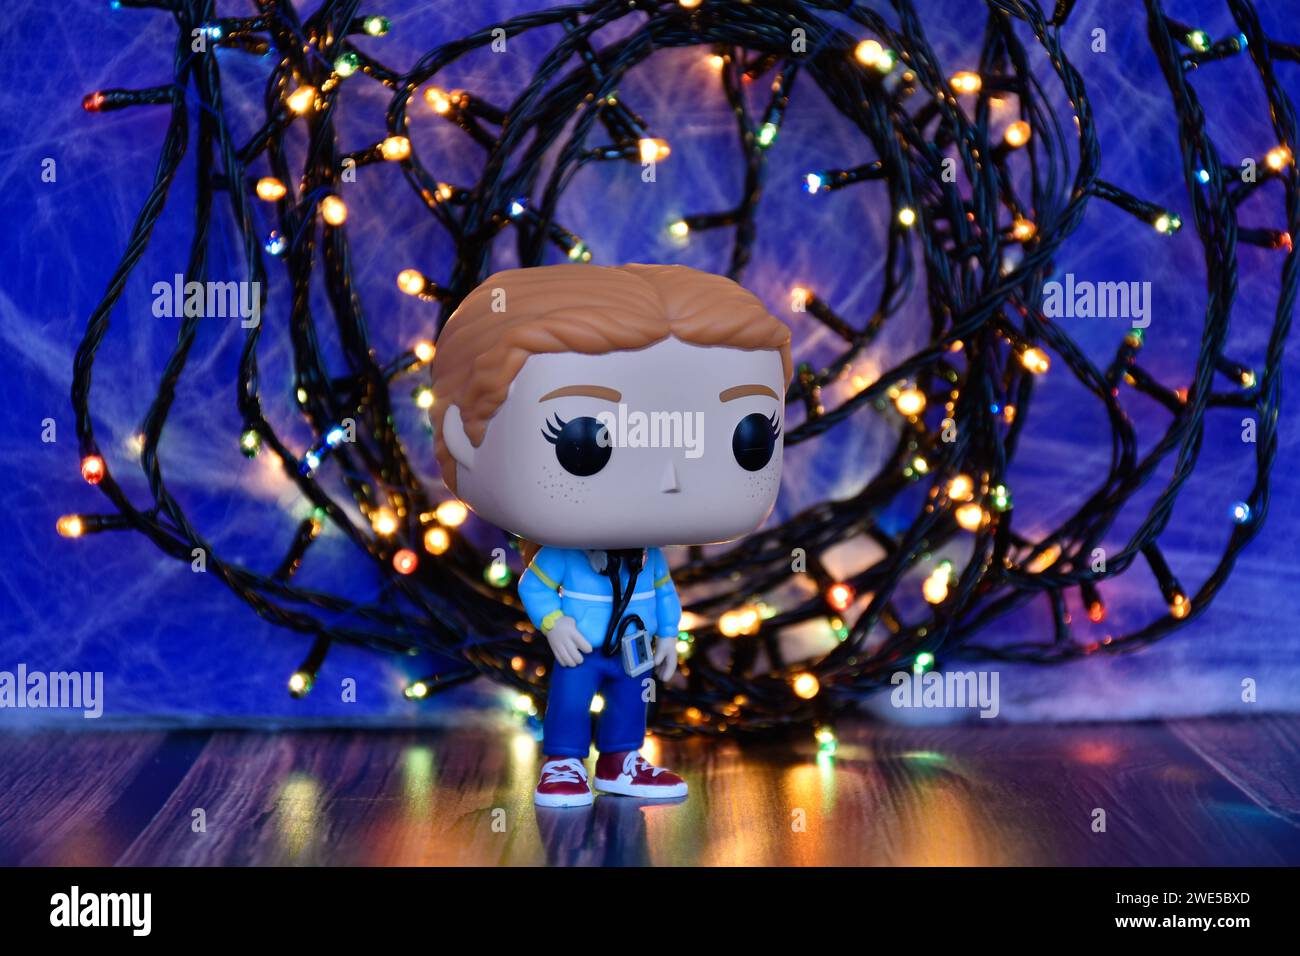 Funko Pop action figure of Max Mayfield with cassette player from TV series Stranger Things. Blue foggy background, colorful lights, mysterious place. Stock Photo